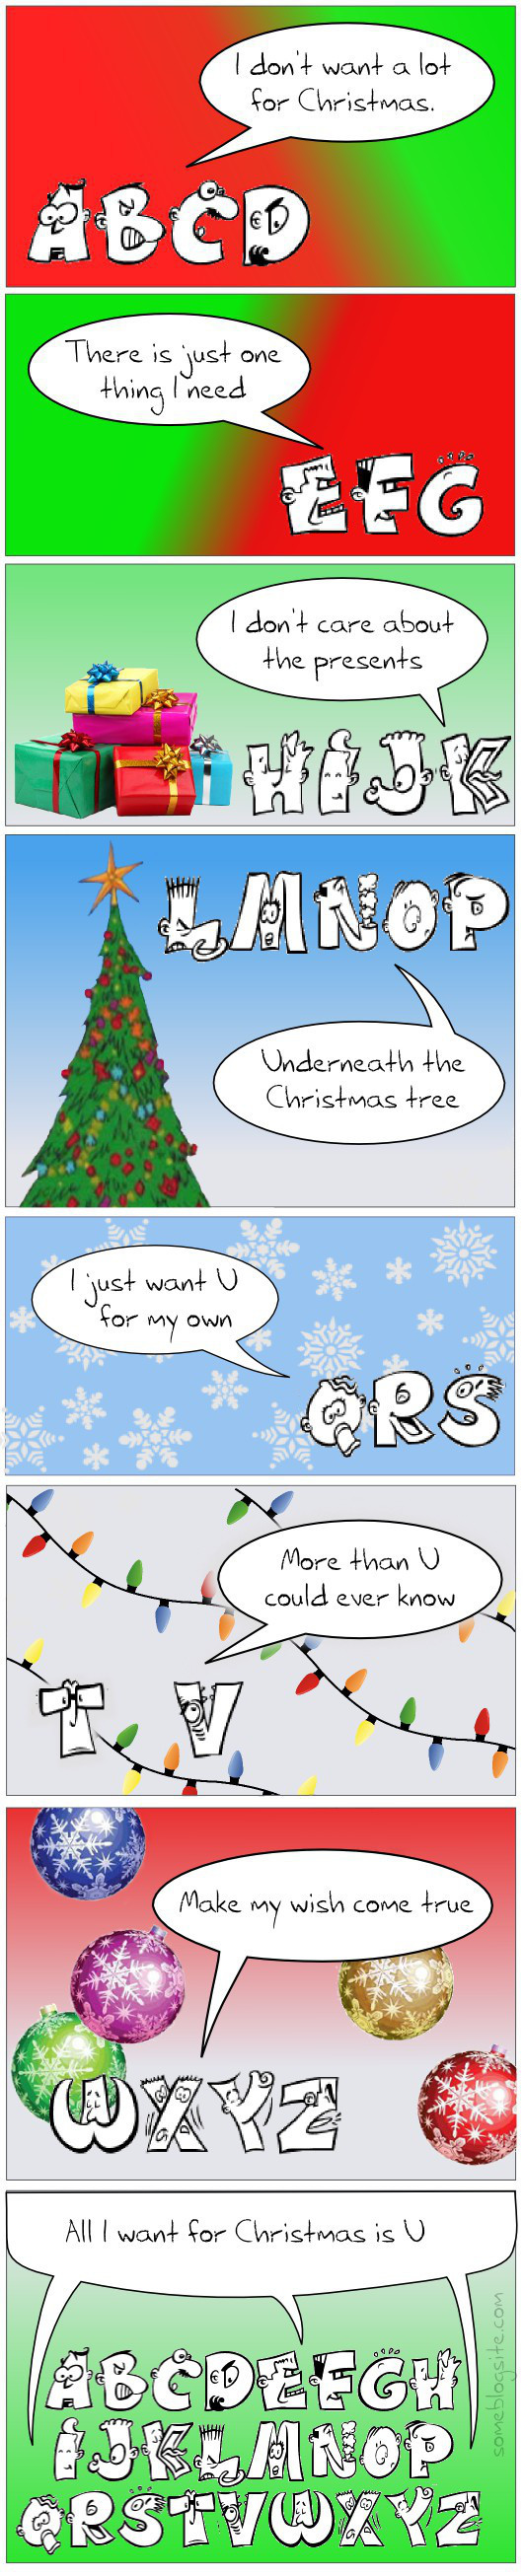 comic of an alphabet singing Mariah Carey's 'All I Want for Christmas is You' but with the letter U instead of the word you